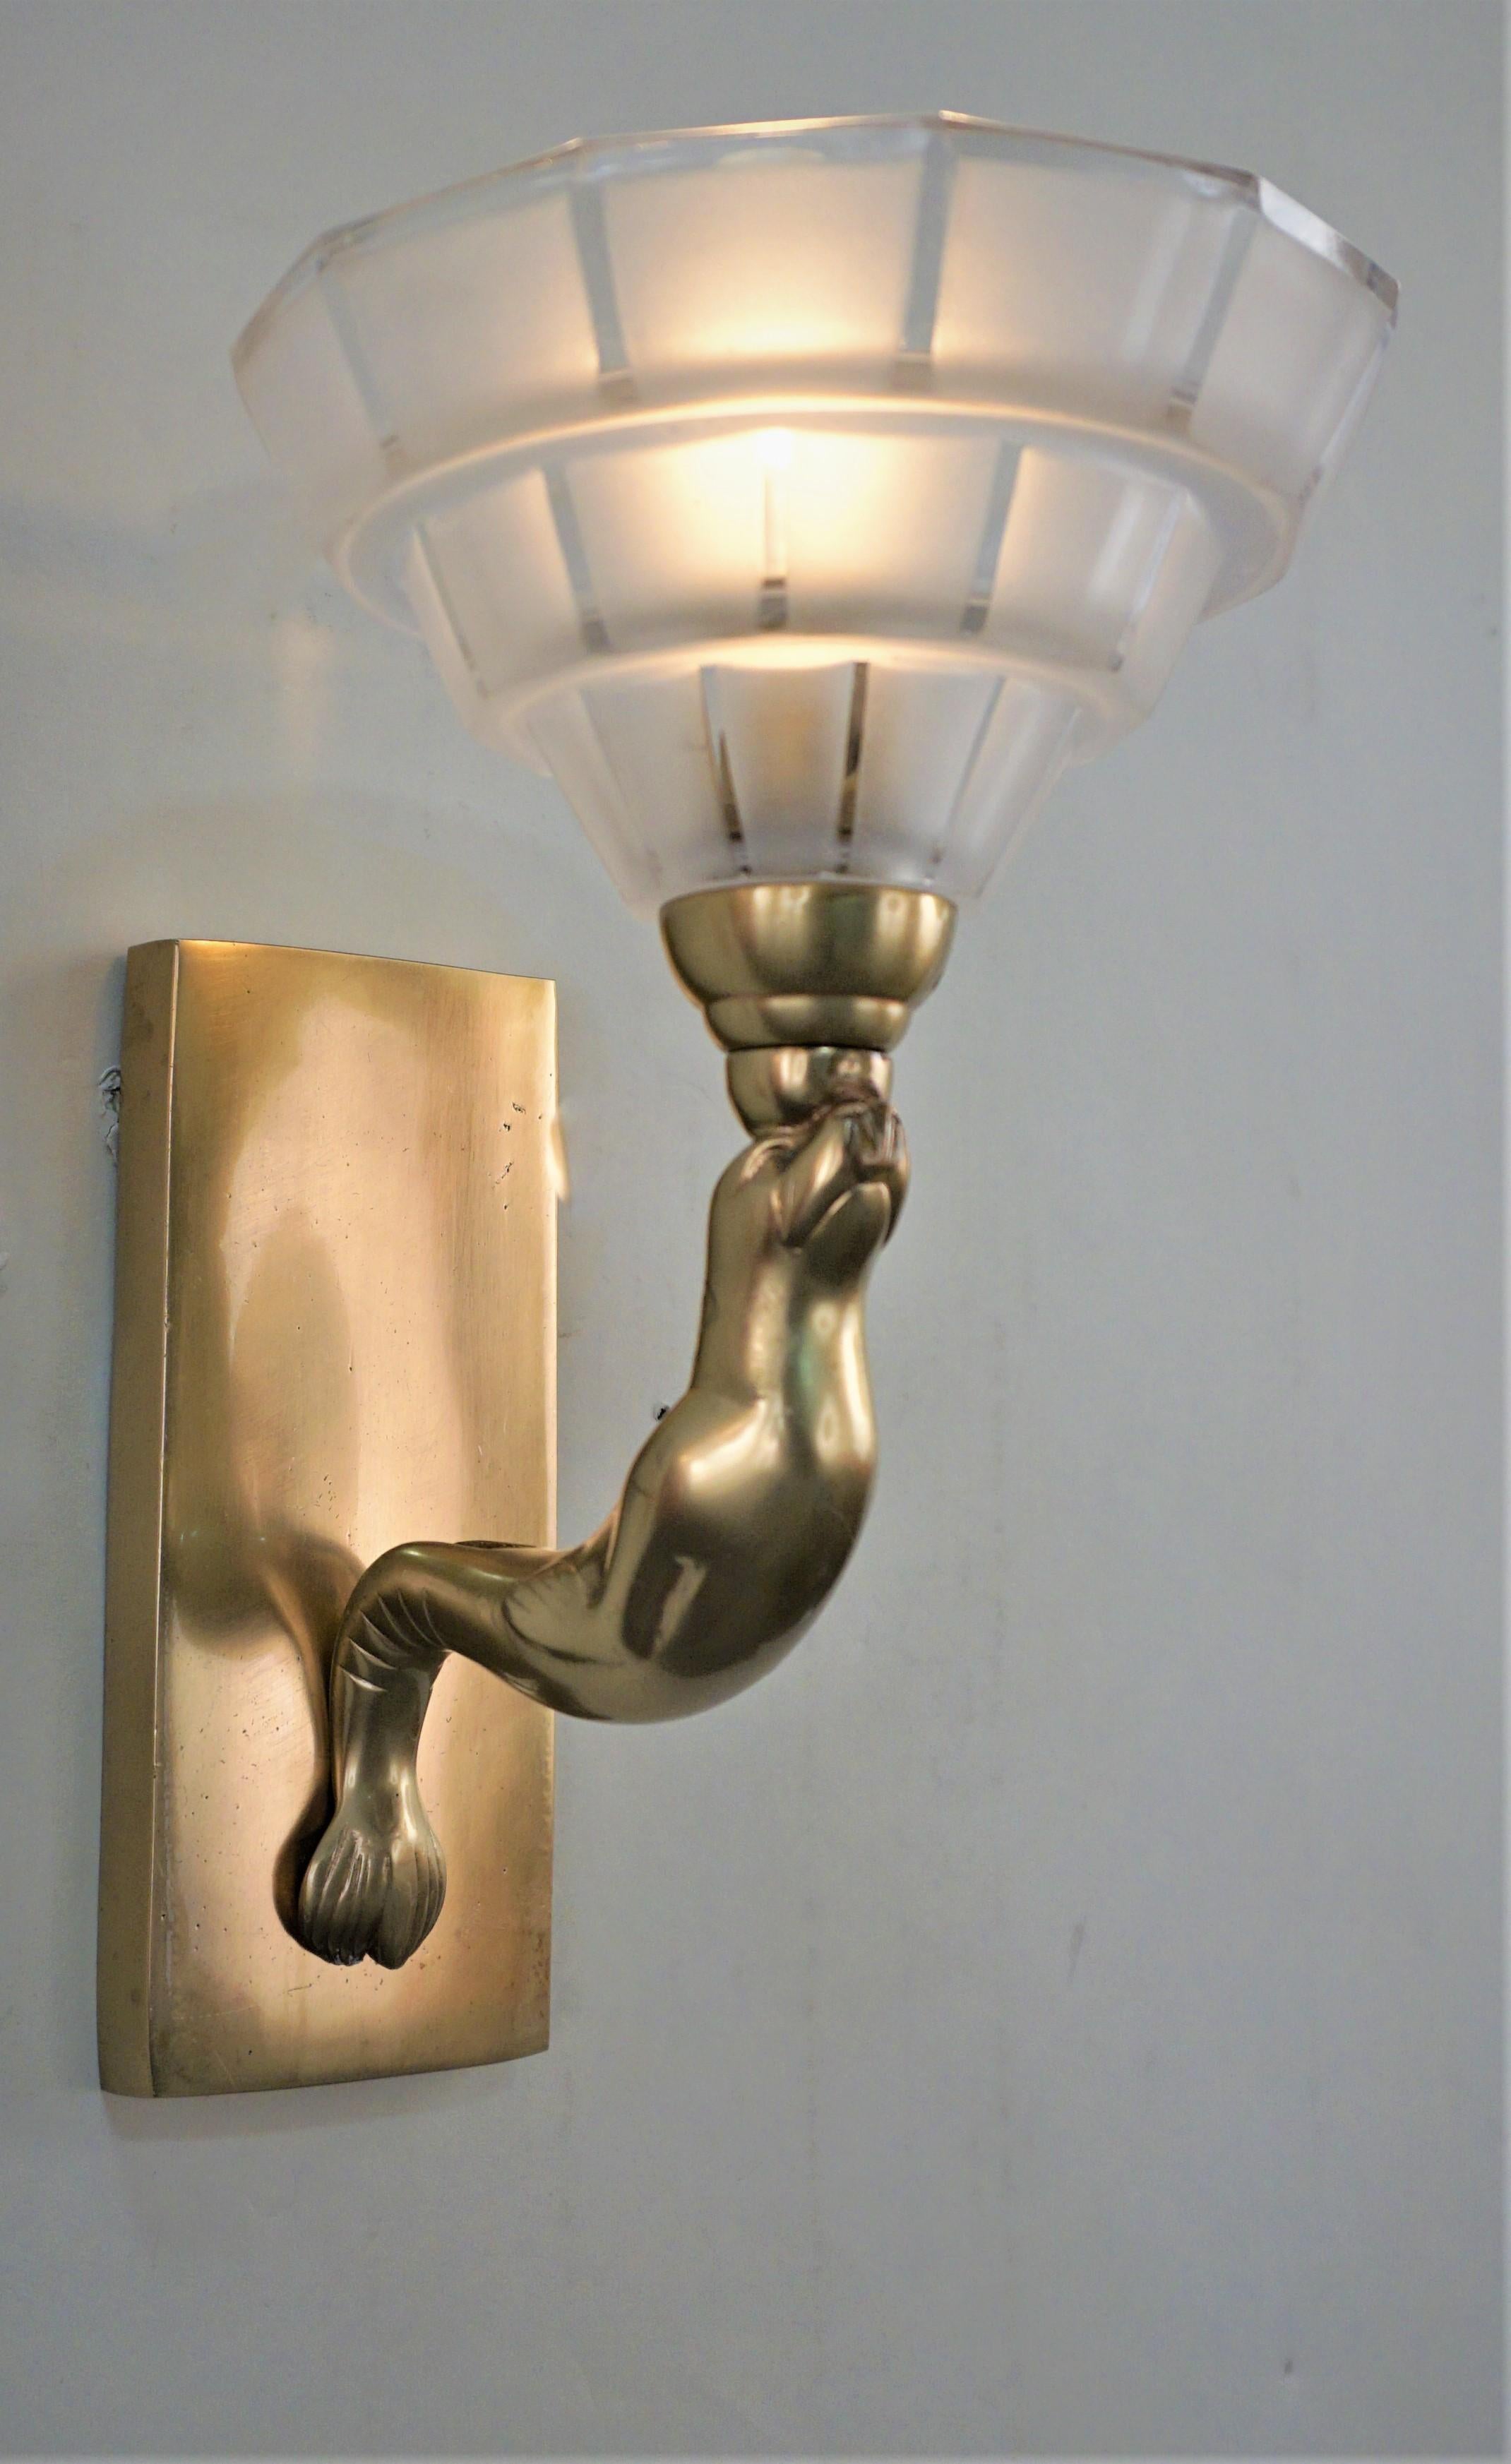 Elegant 1920's bronze seal with clear frost glass shade wall sconces
Professionally rewired and ready for installation.
Back plate measurement